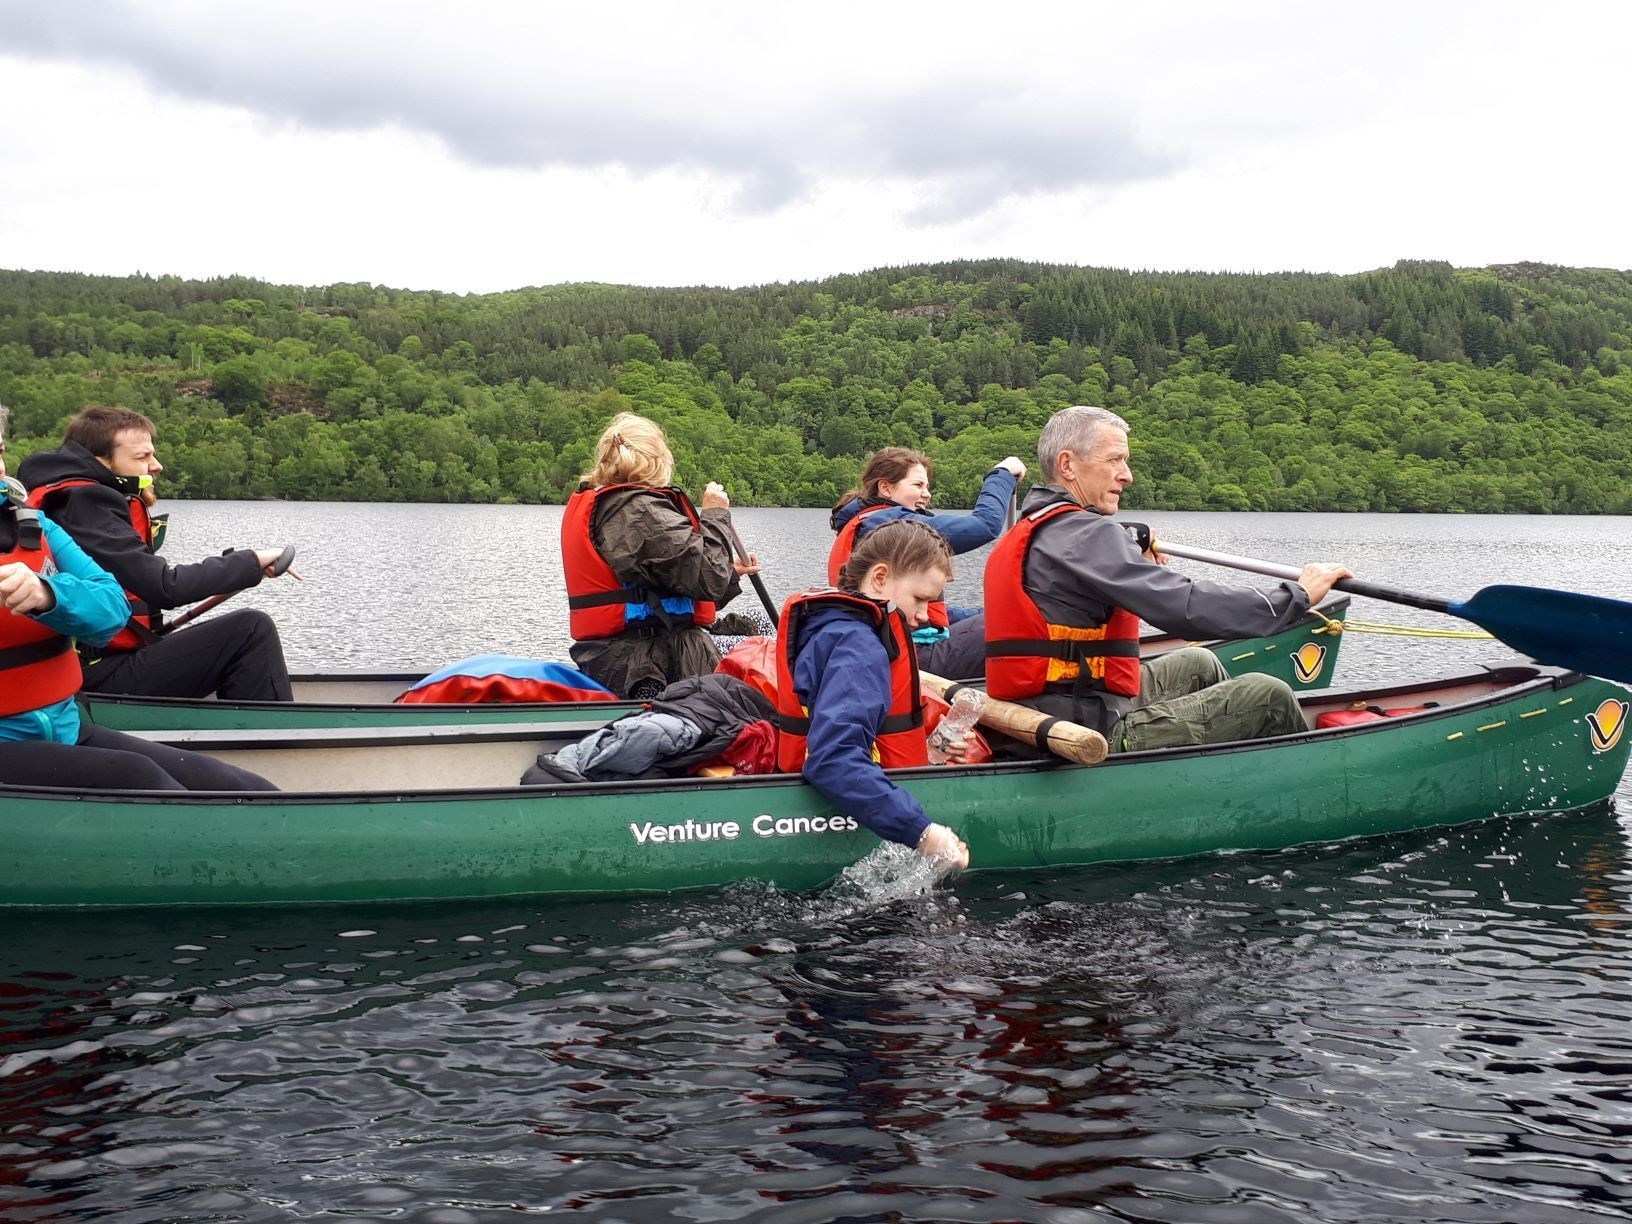 Pupils got the chance to learn how to canoe.